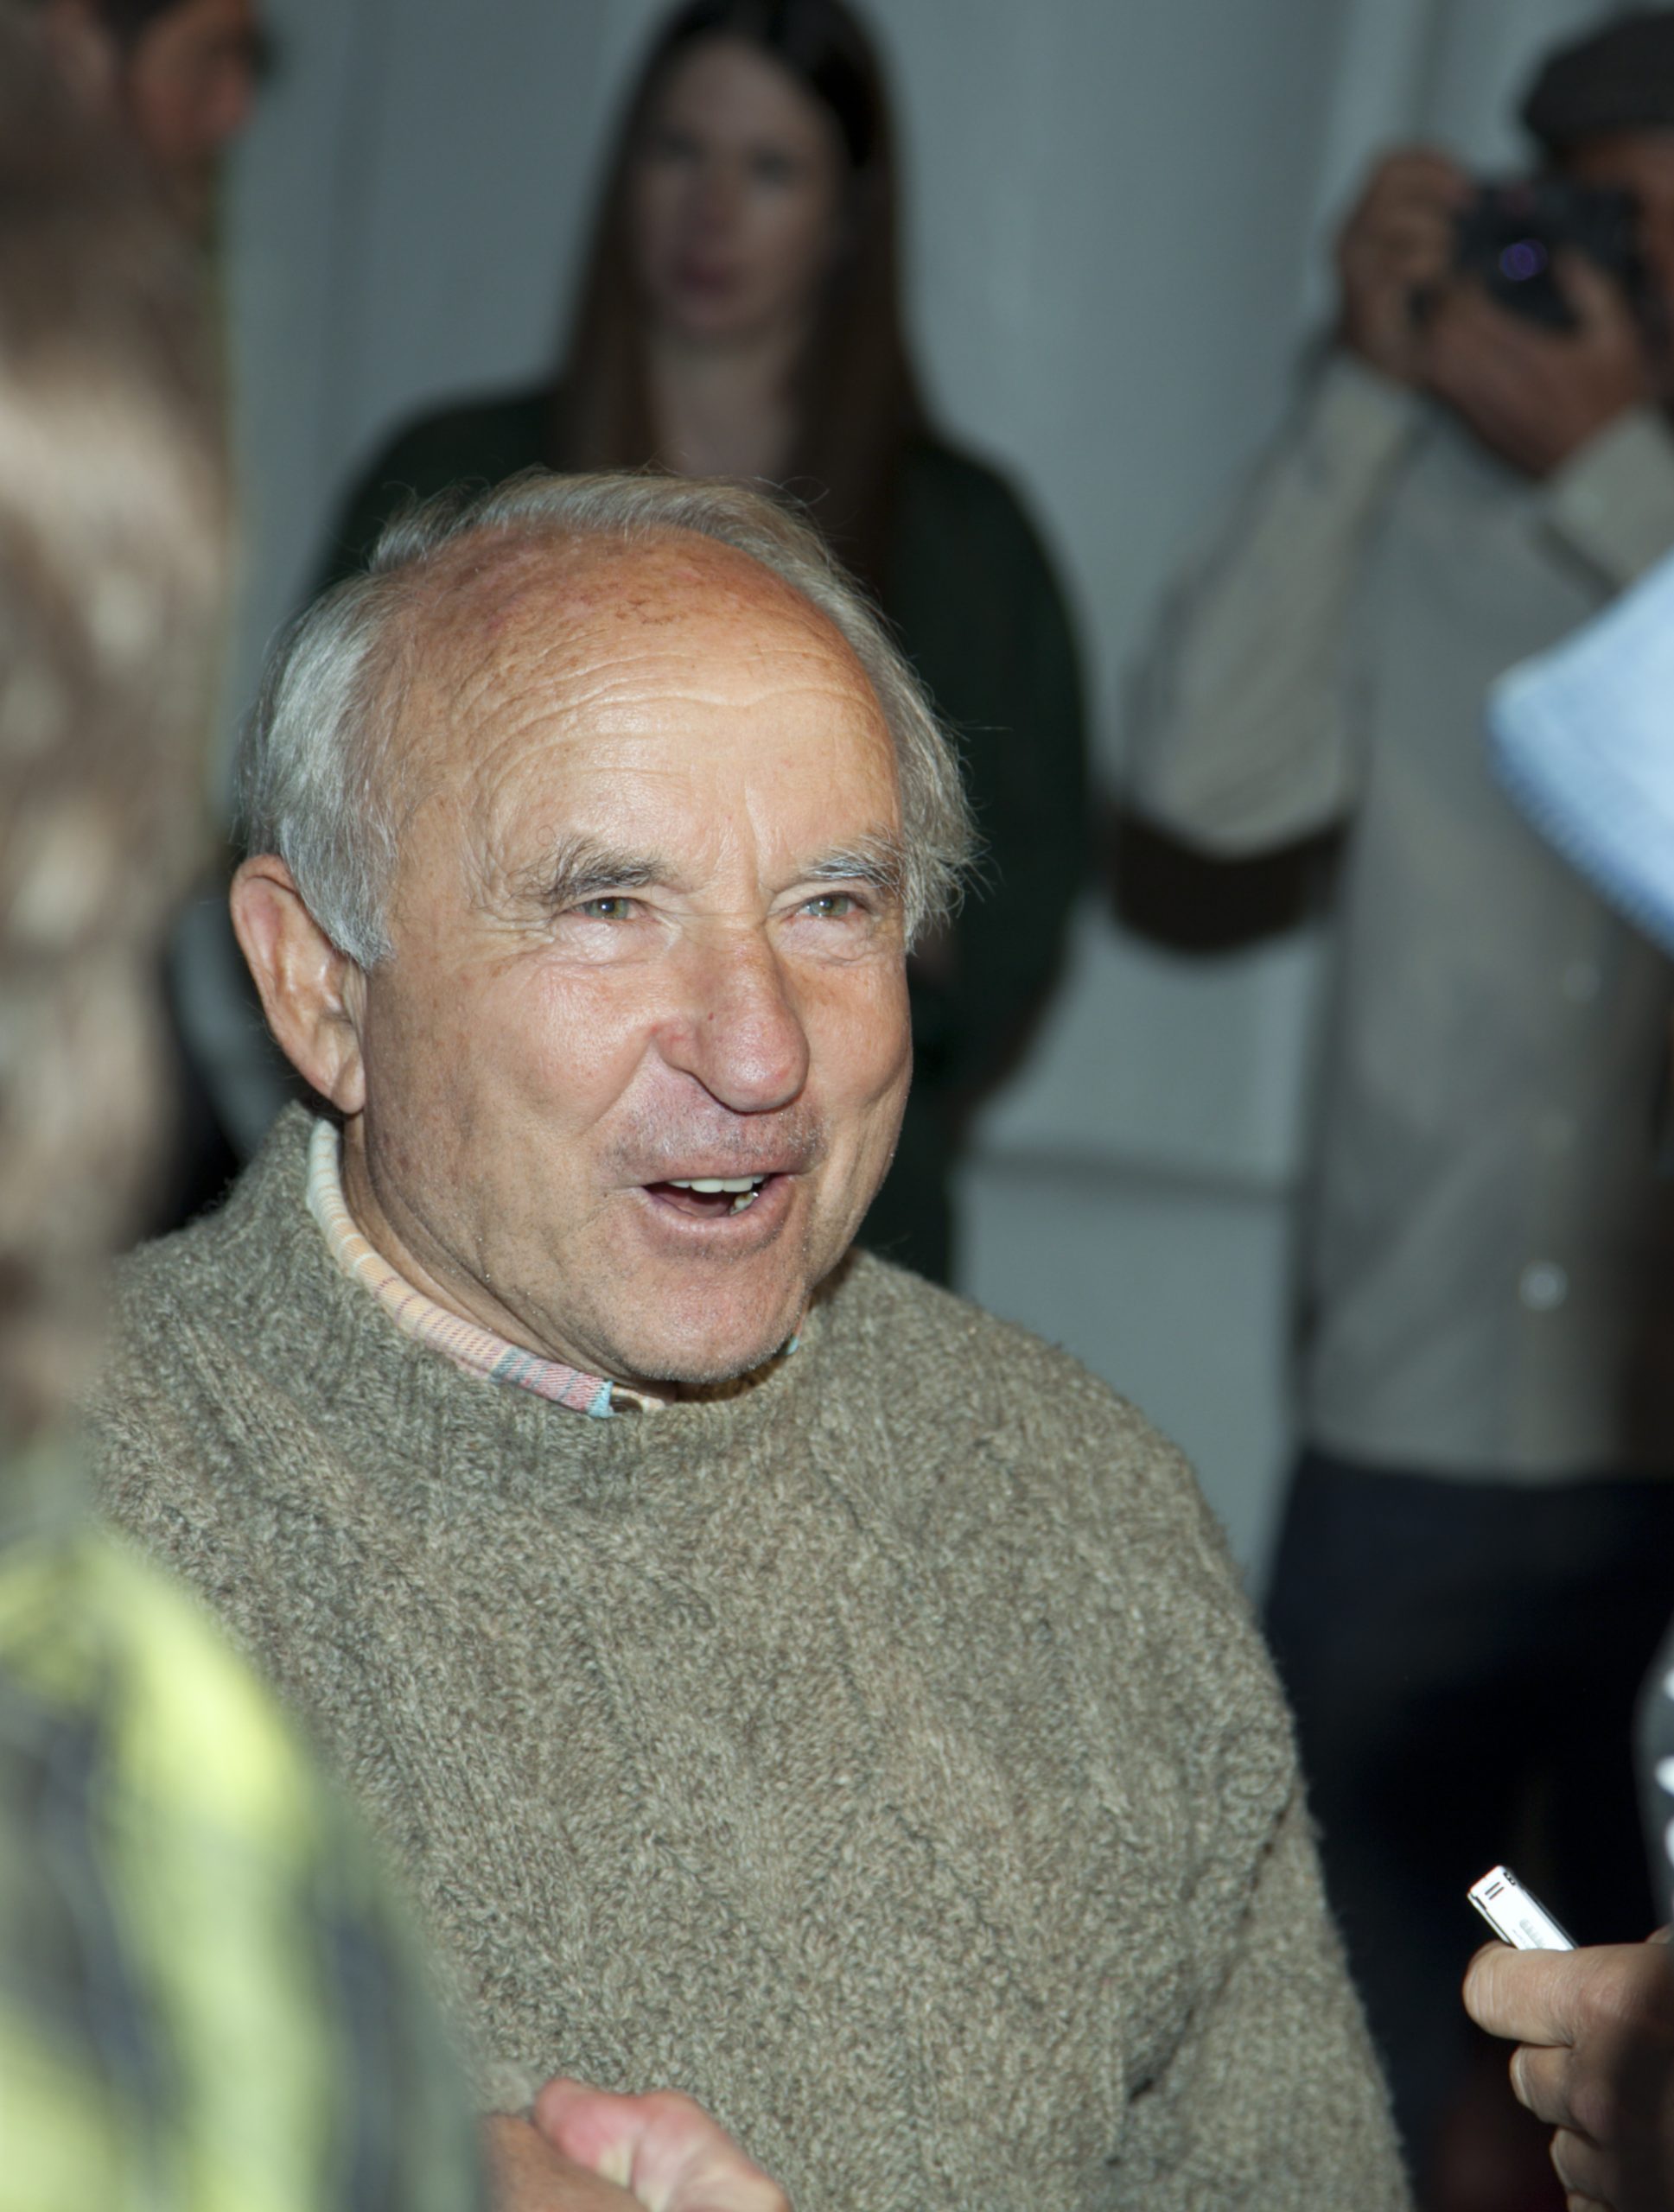 Photo of Yvon Chouinard, Patagonia's founder, in a grey-green sweater, with light skin, grey receding hair and dark eyes.